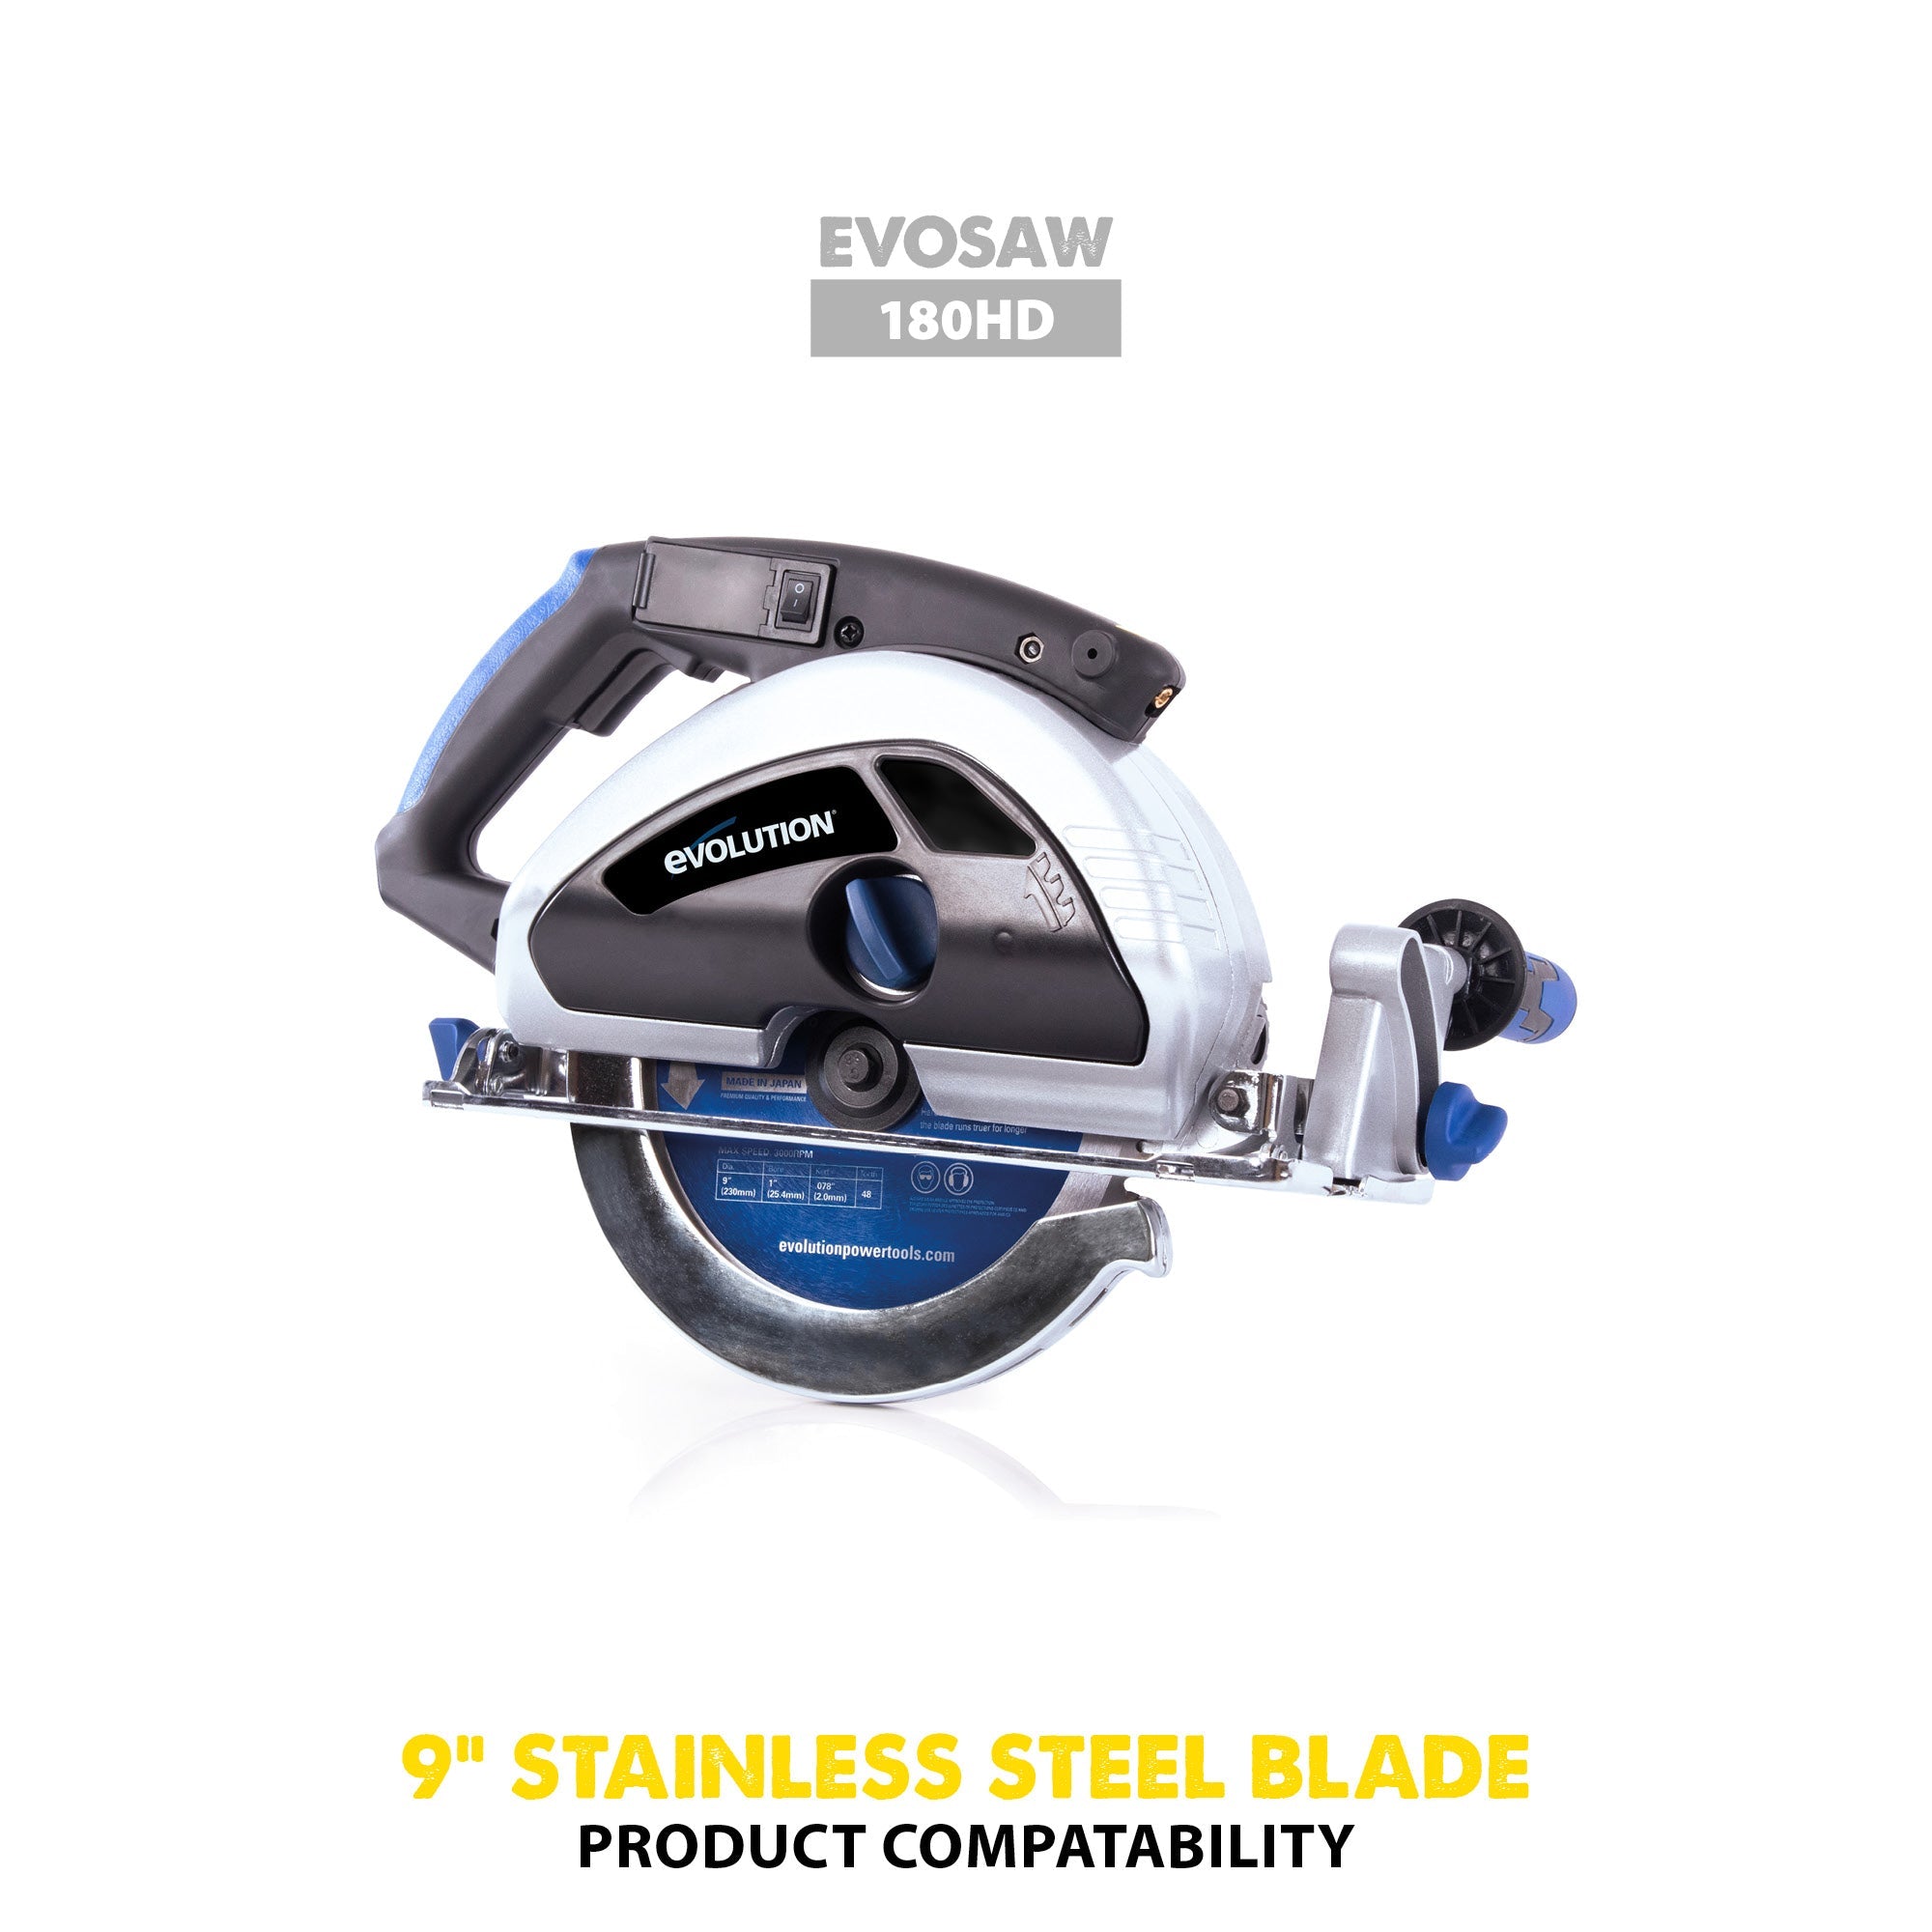 Evolution 230BLADESSN | 9 in. | 60T | 1 in. Arbor | Stainless Steel TCT Blade